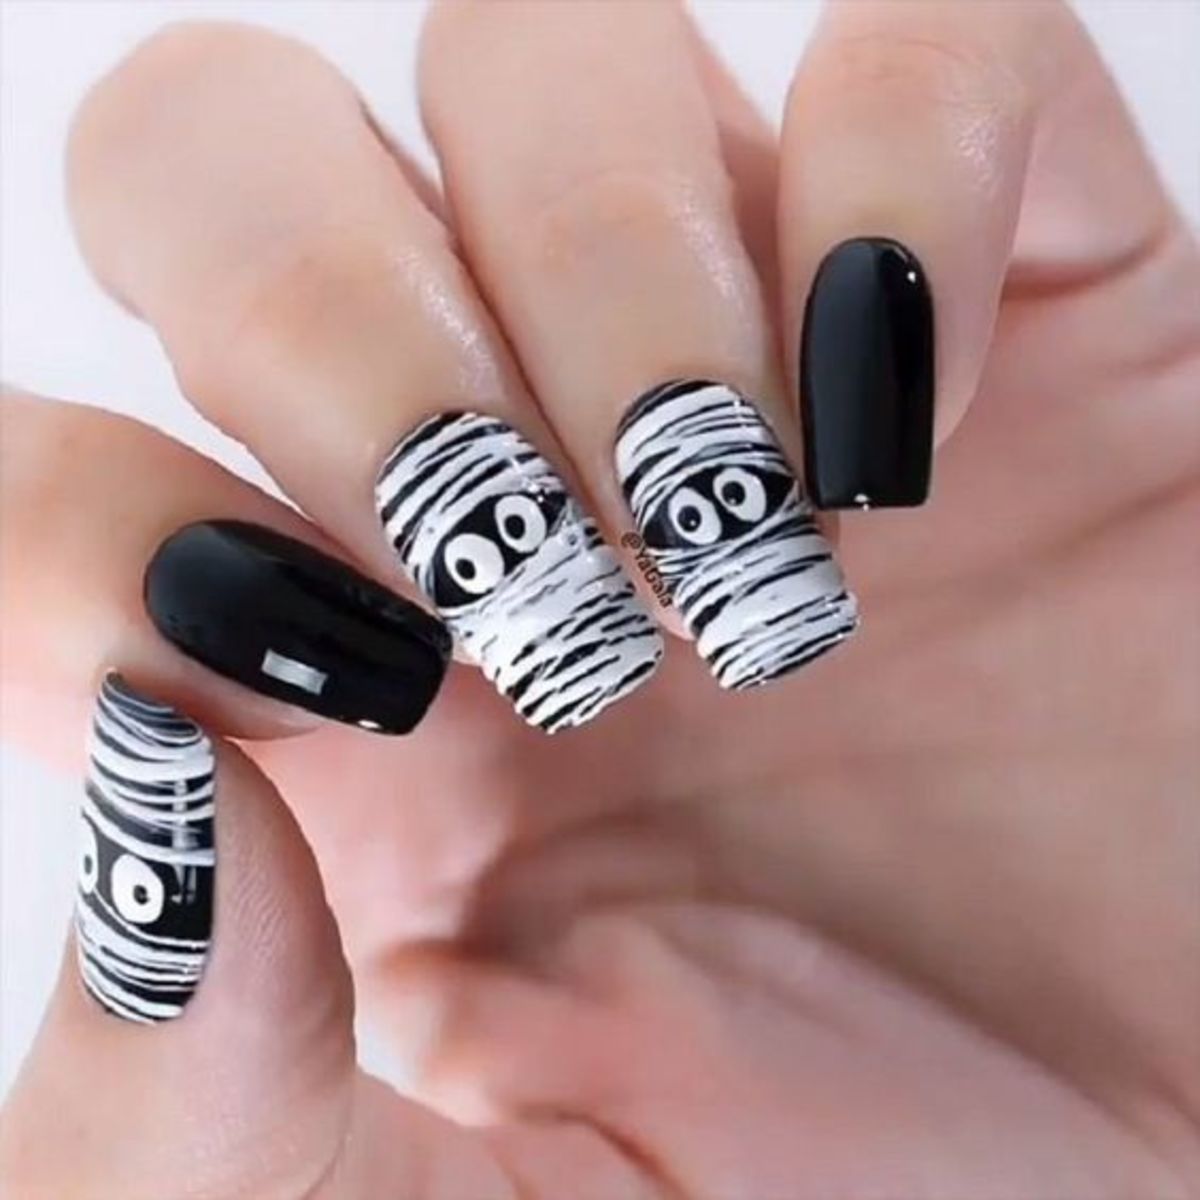 Cute girly nails. Stamping design / Стэмпинг. - YouTube